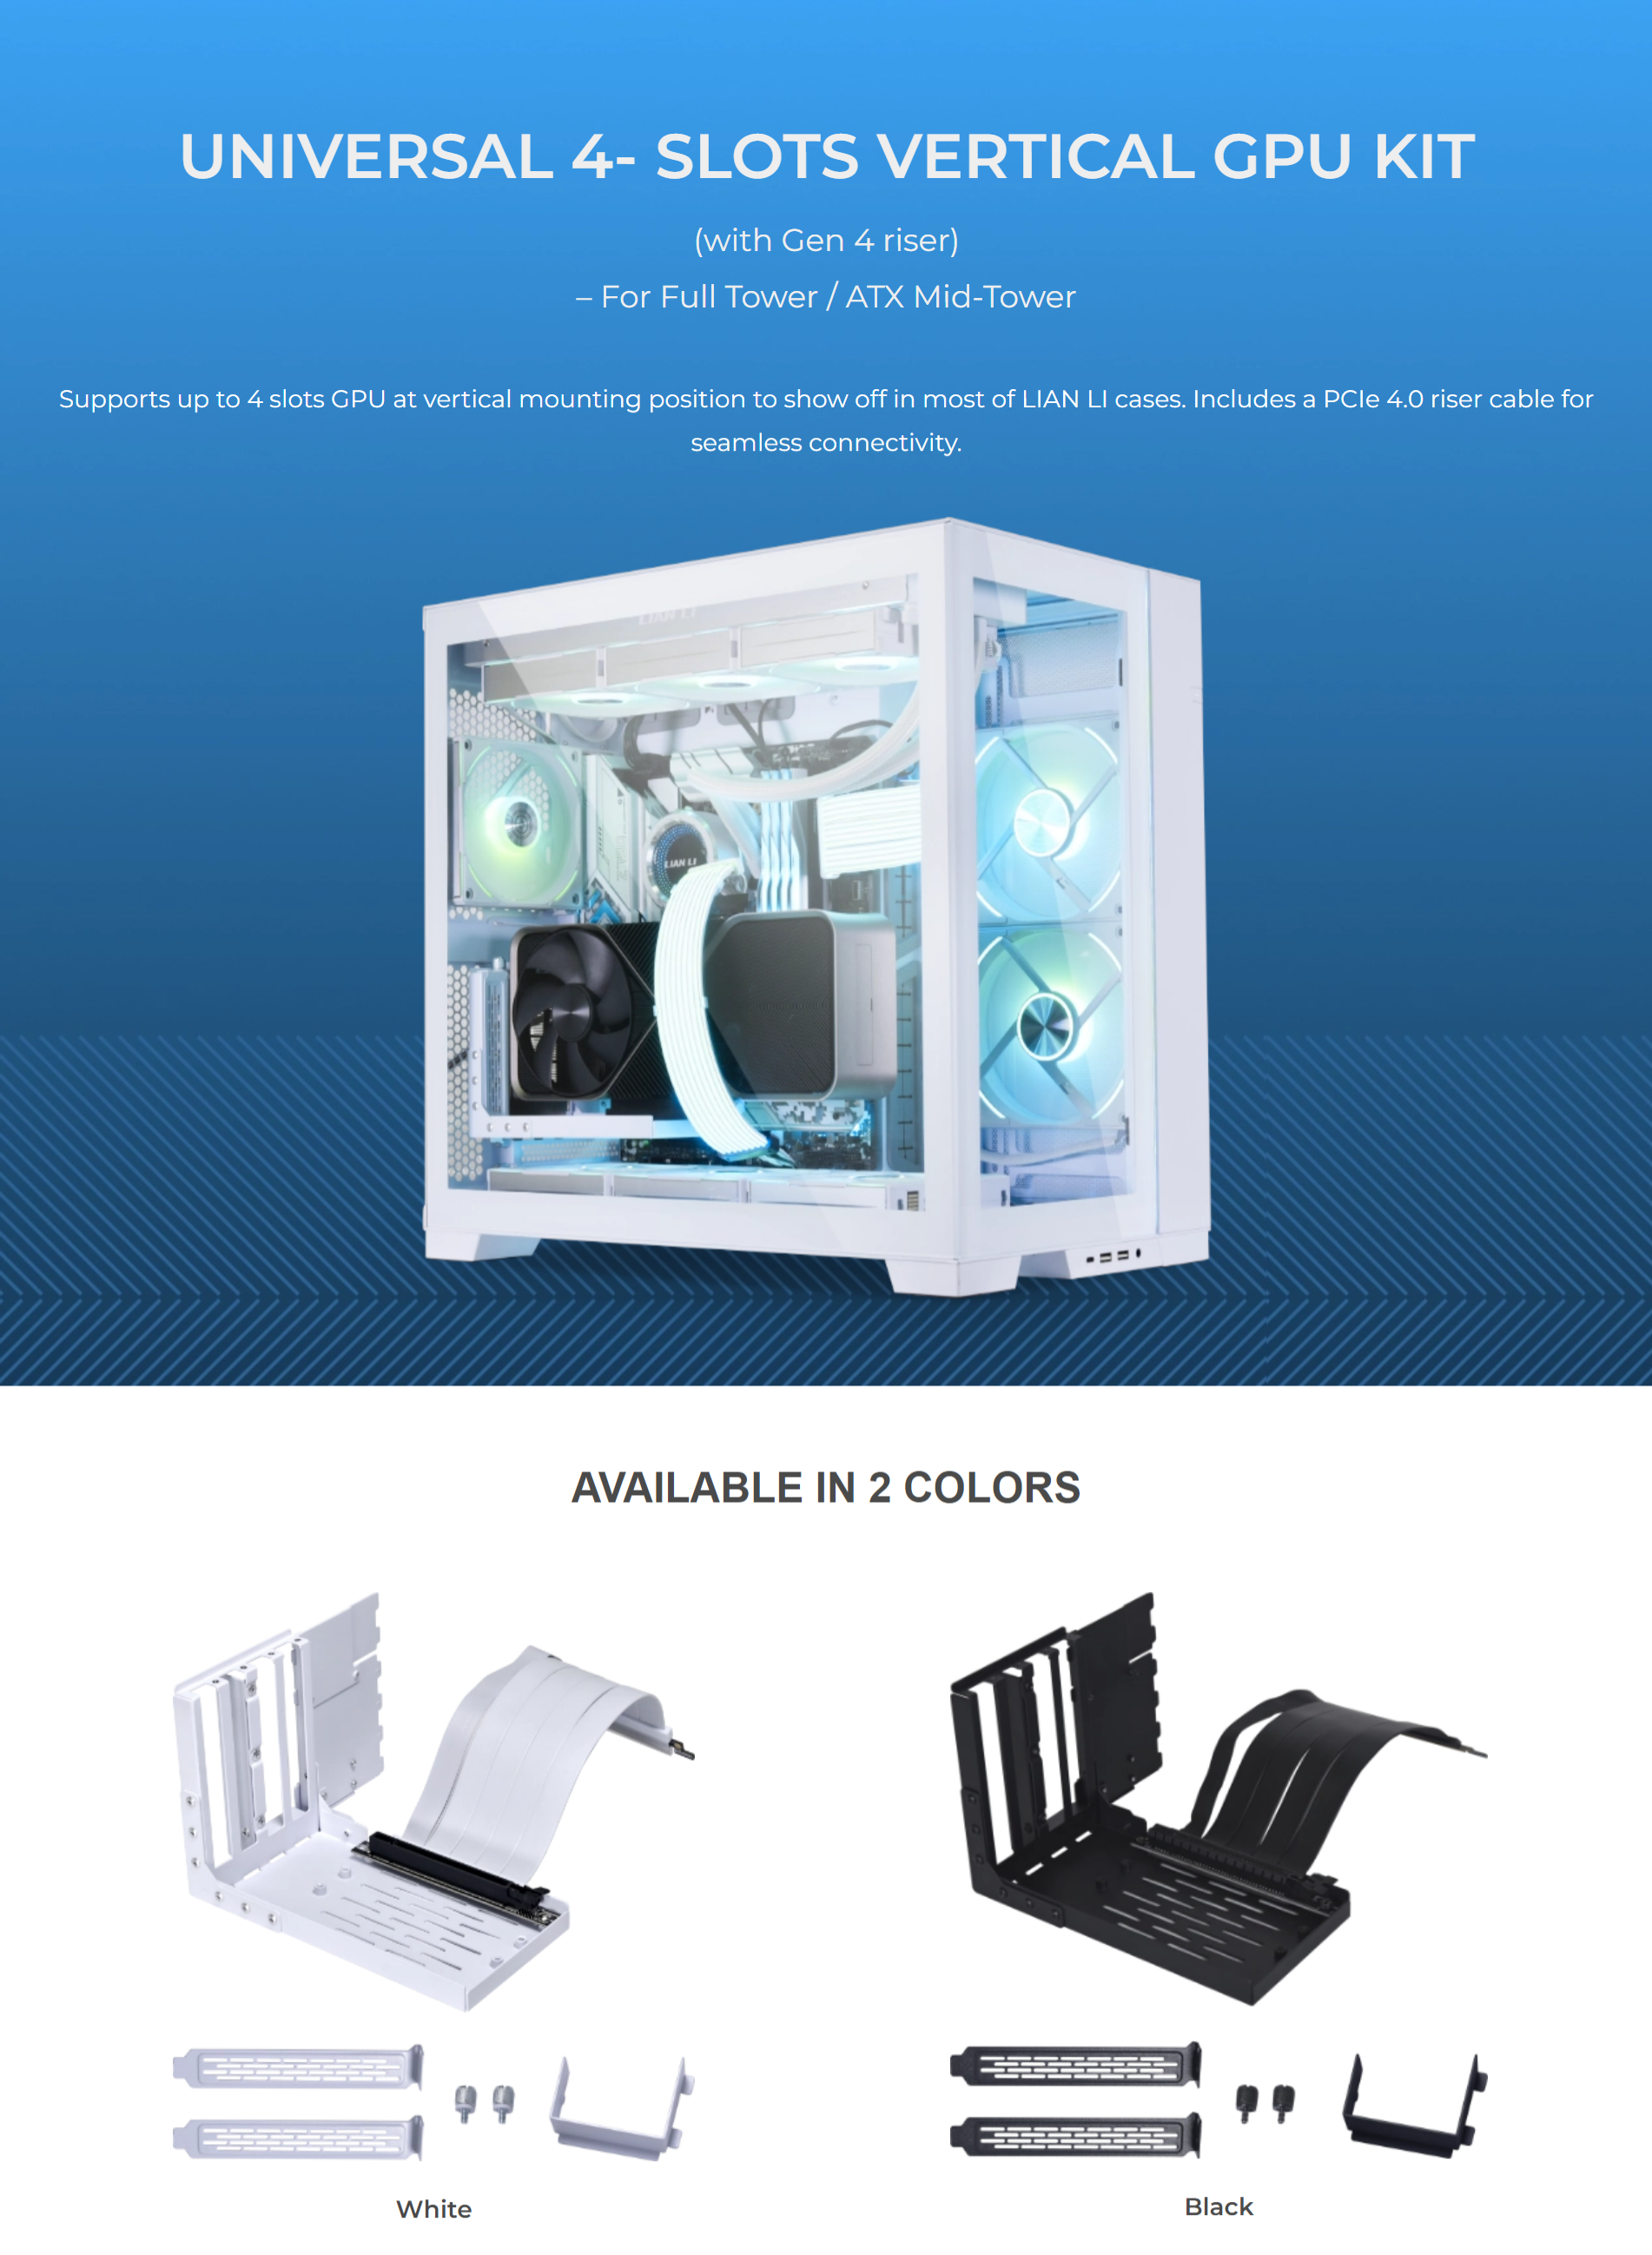 A large marketing image providing additional information about the product Lian Li VG4-4-V2X Universal 4 Slots Vertical GPU Kit with Gen 4 Riser - Black - Additional alt info not provided